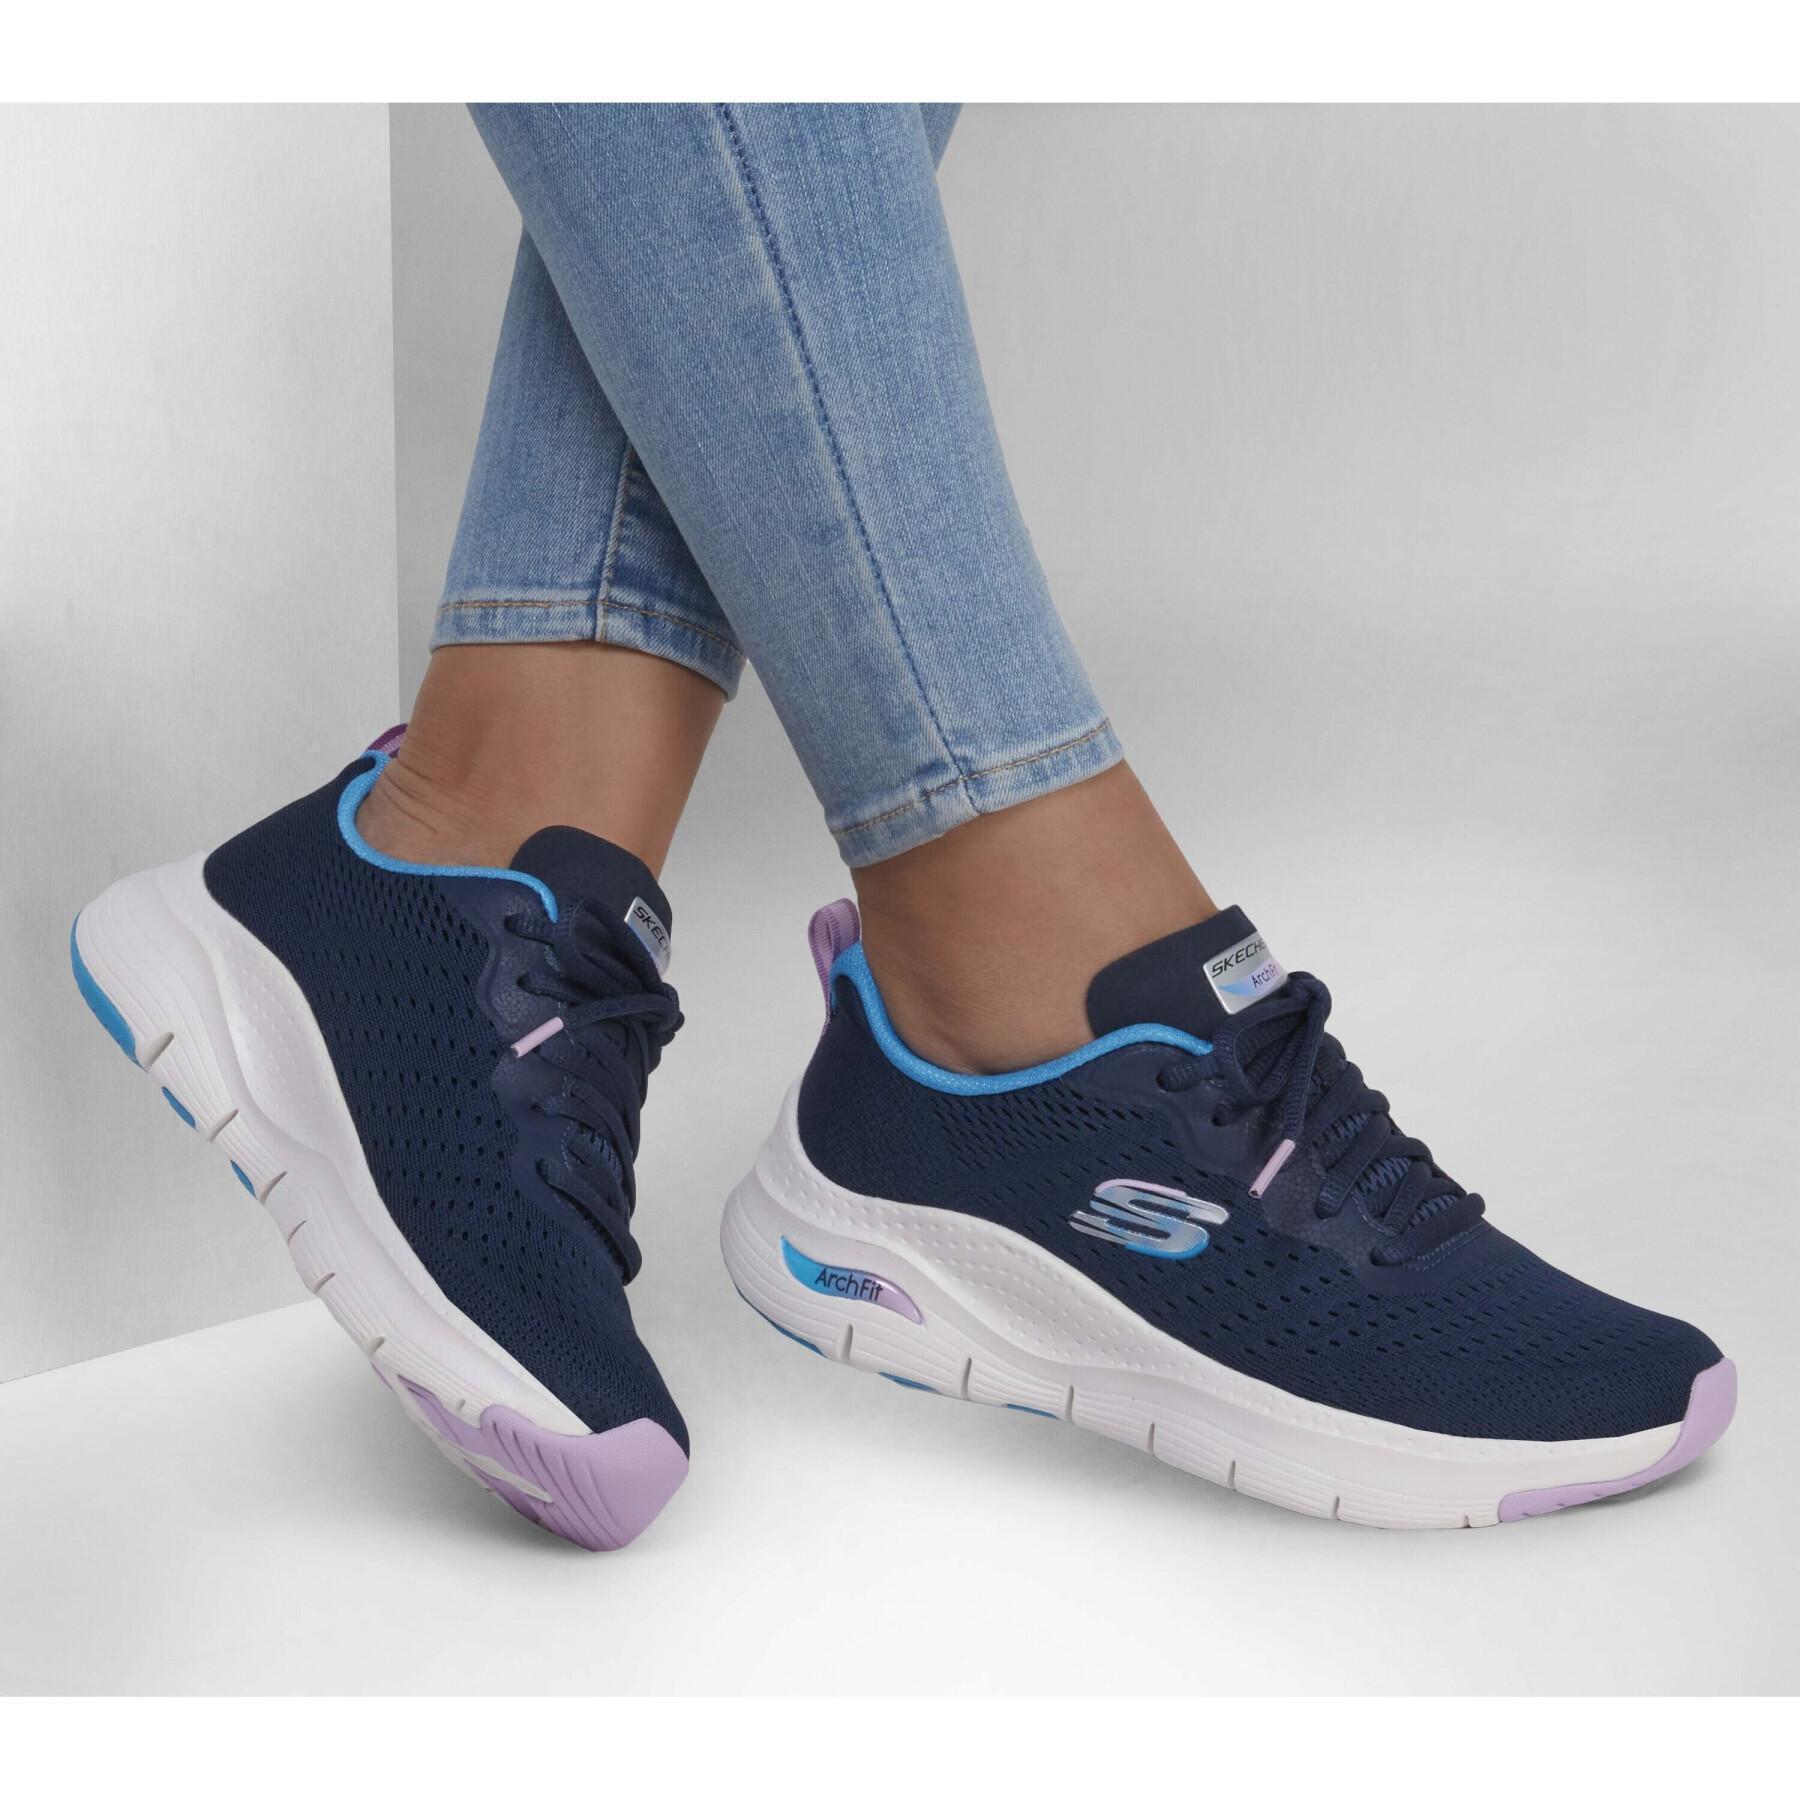 Formadoras de mulheres Skechers Arch Fit-Infinity Cool